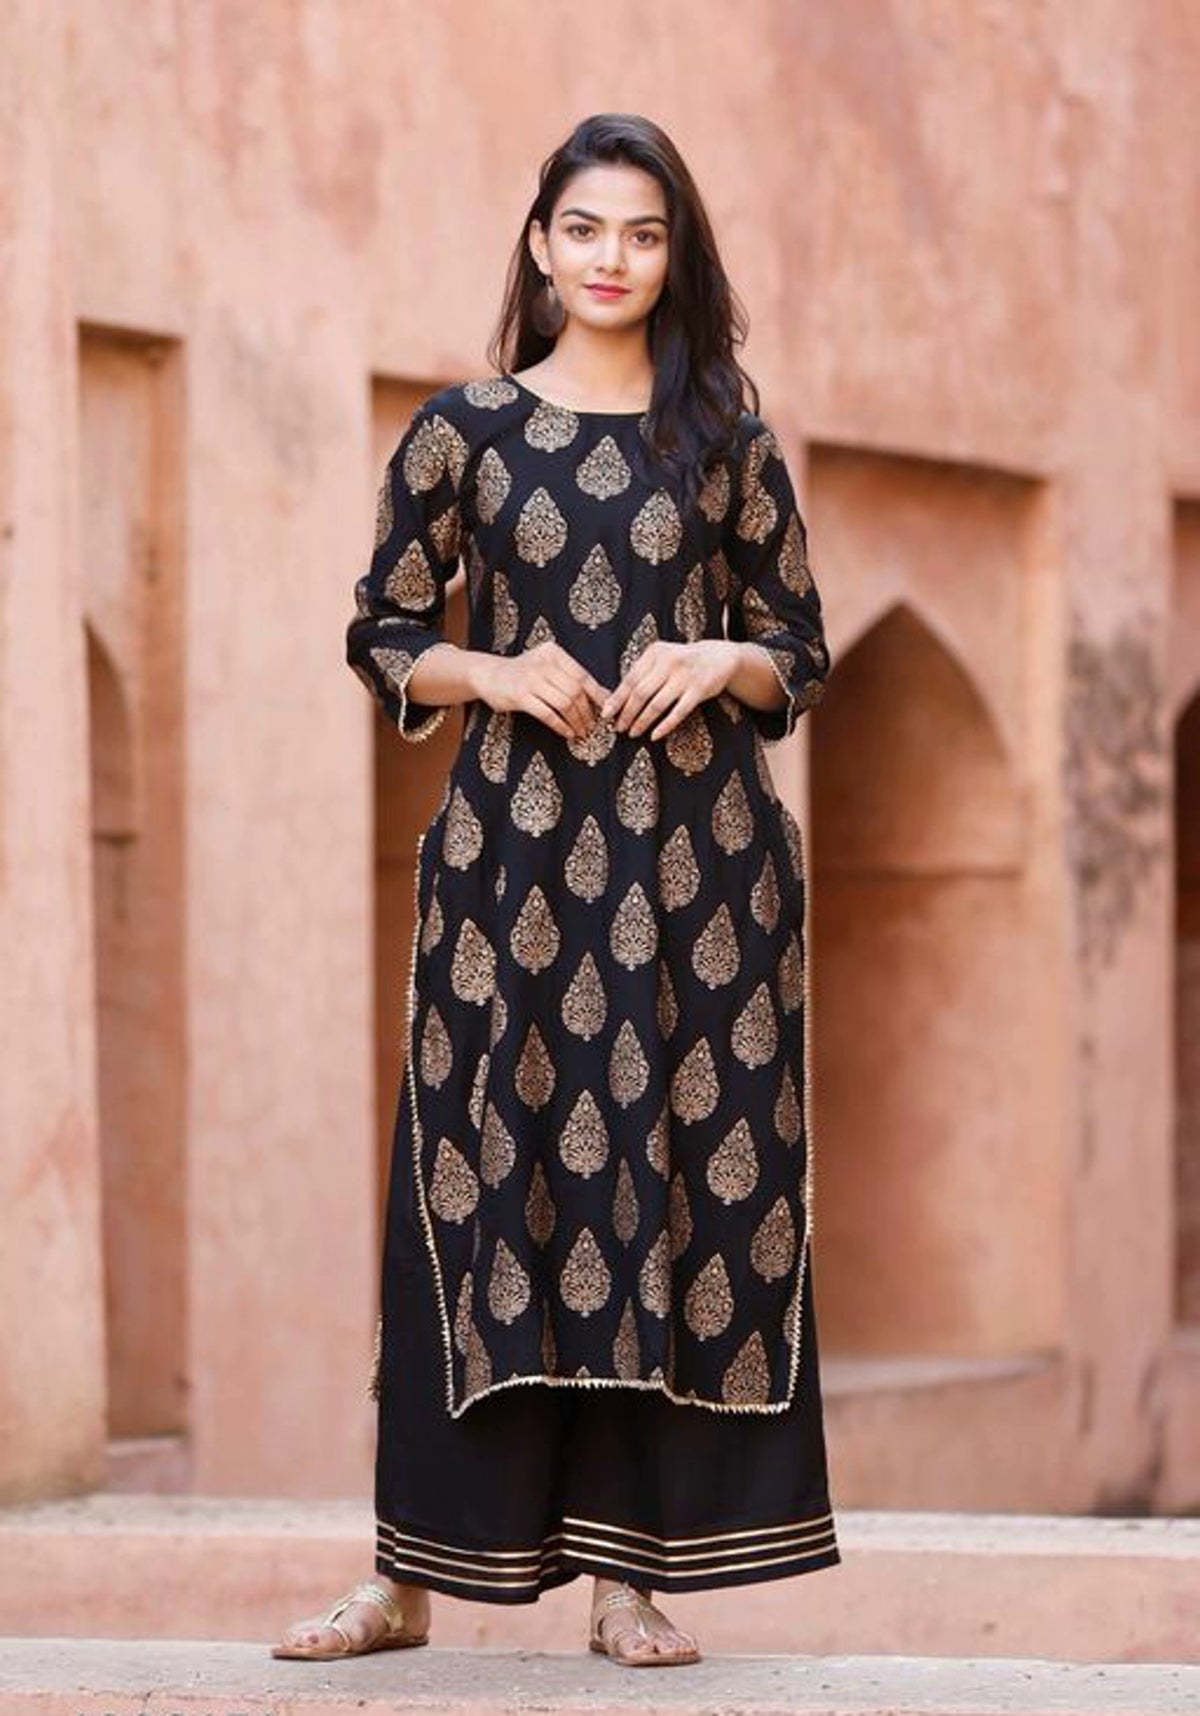 Buy Stylish A-Line Black Cotton Kurti For Women Online In India At  Discounted Prices